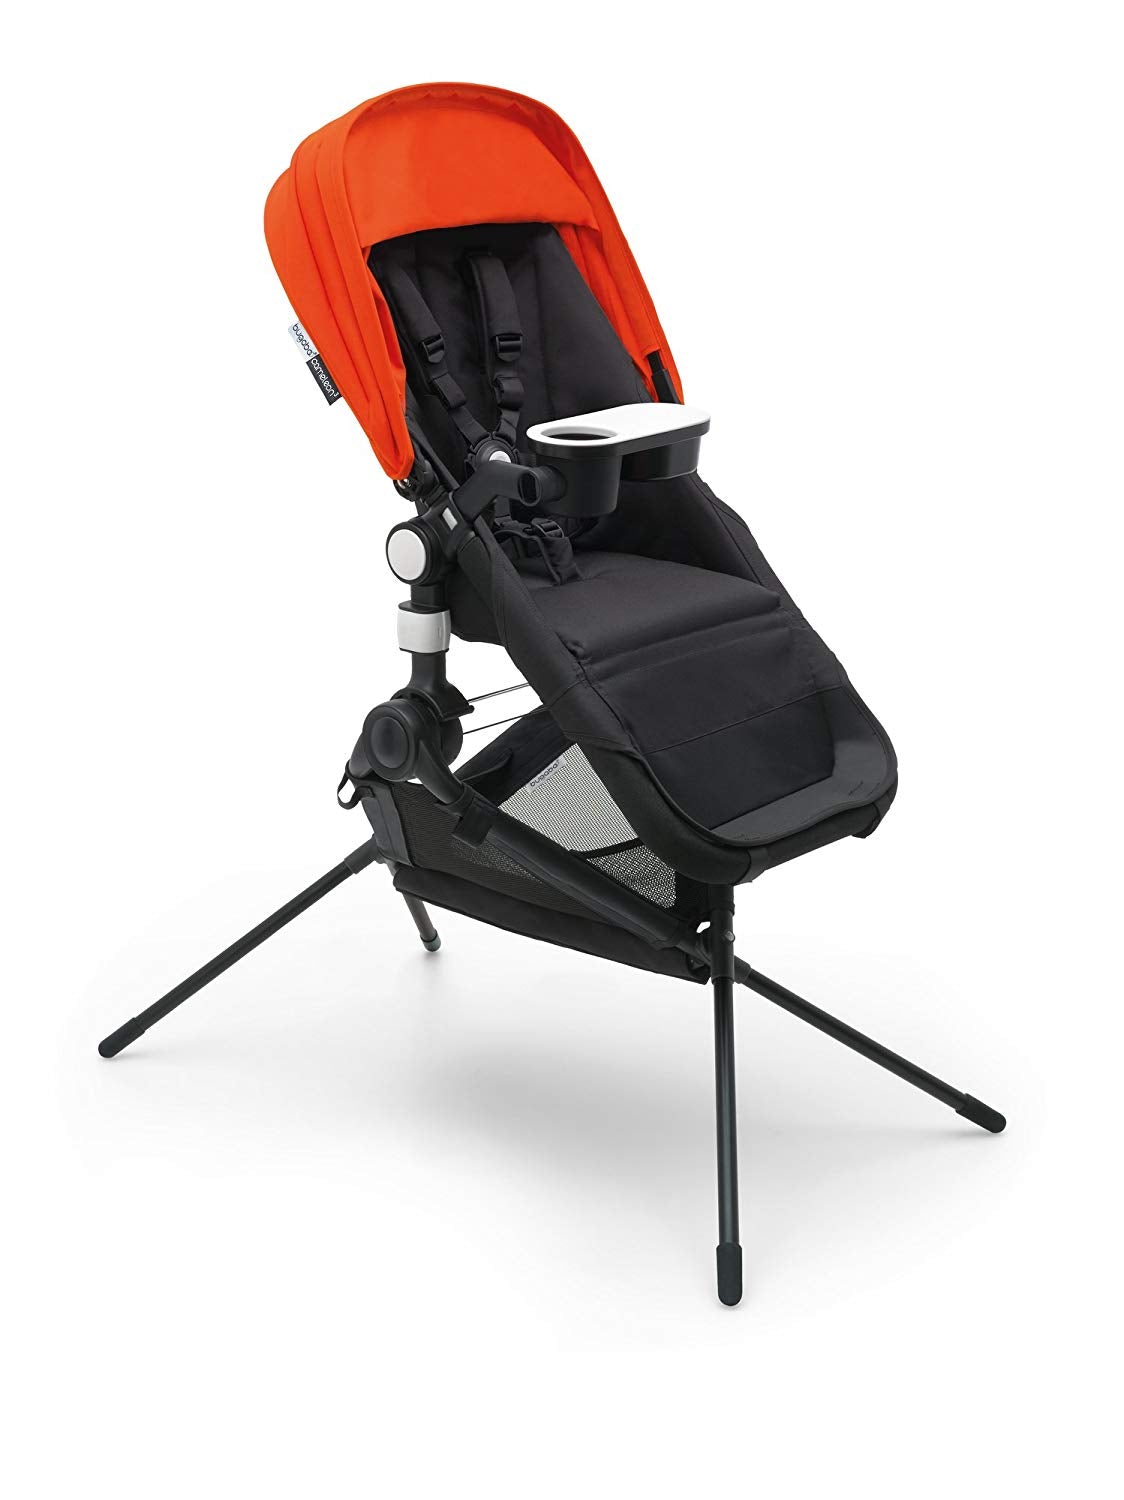 BUGABOO Stand, Black - ANB Baby -$100 - $300